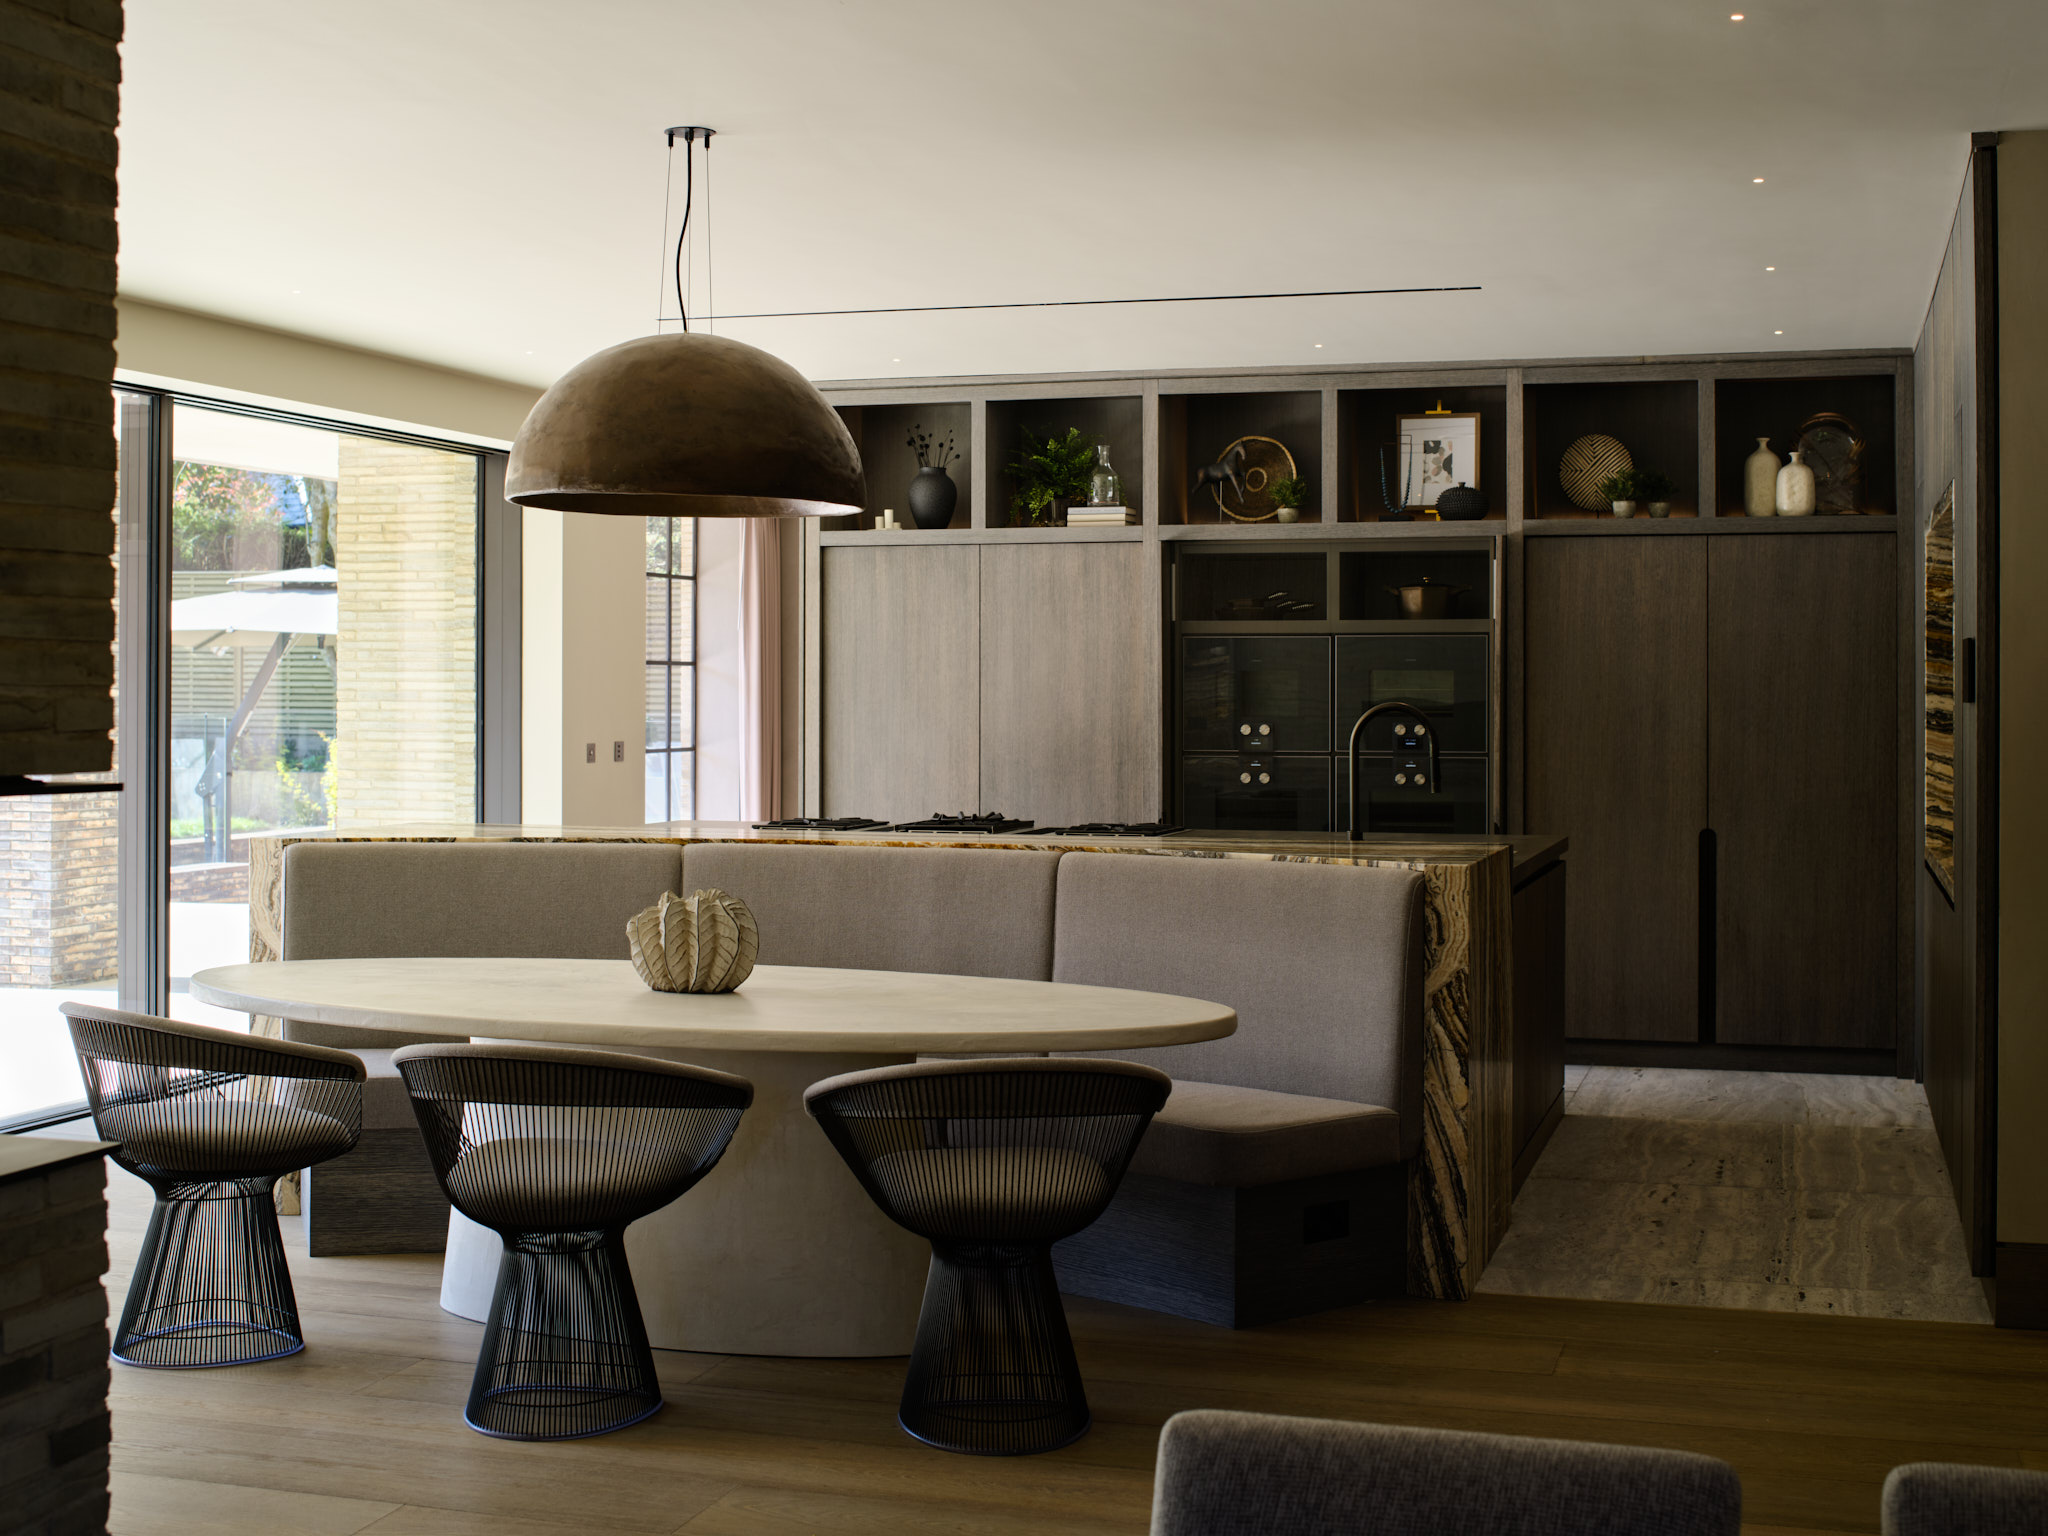 A grey stained oak minimalist style kitchen with dining table & banquette seating